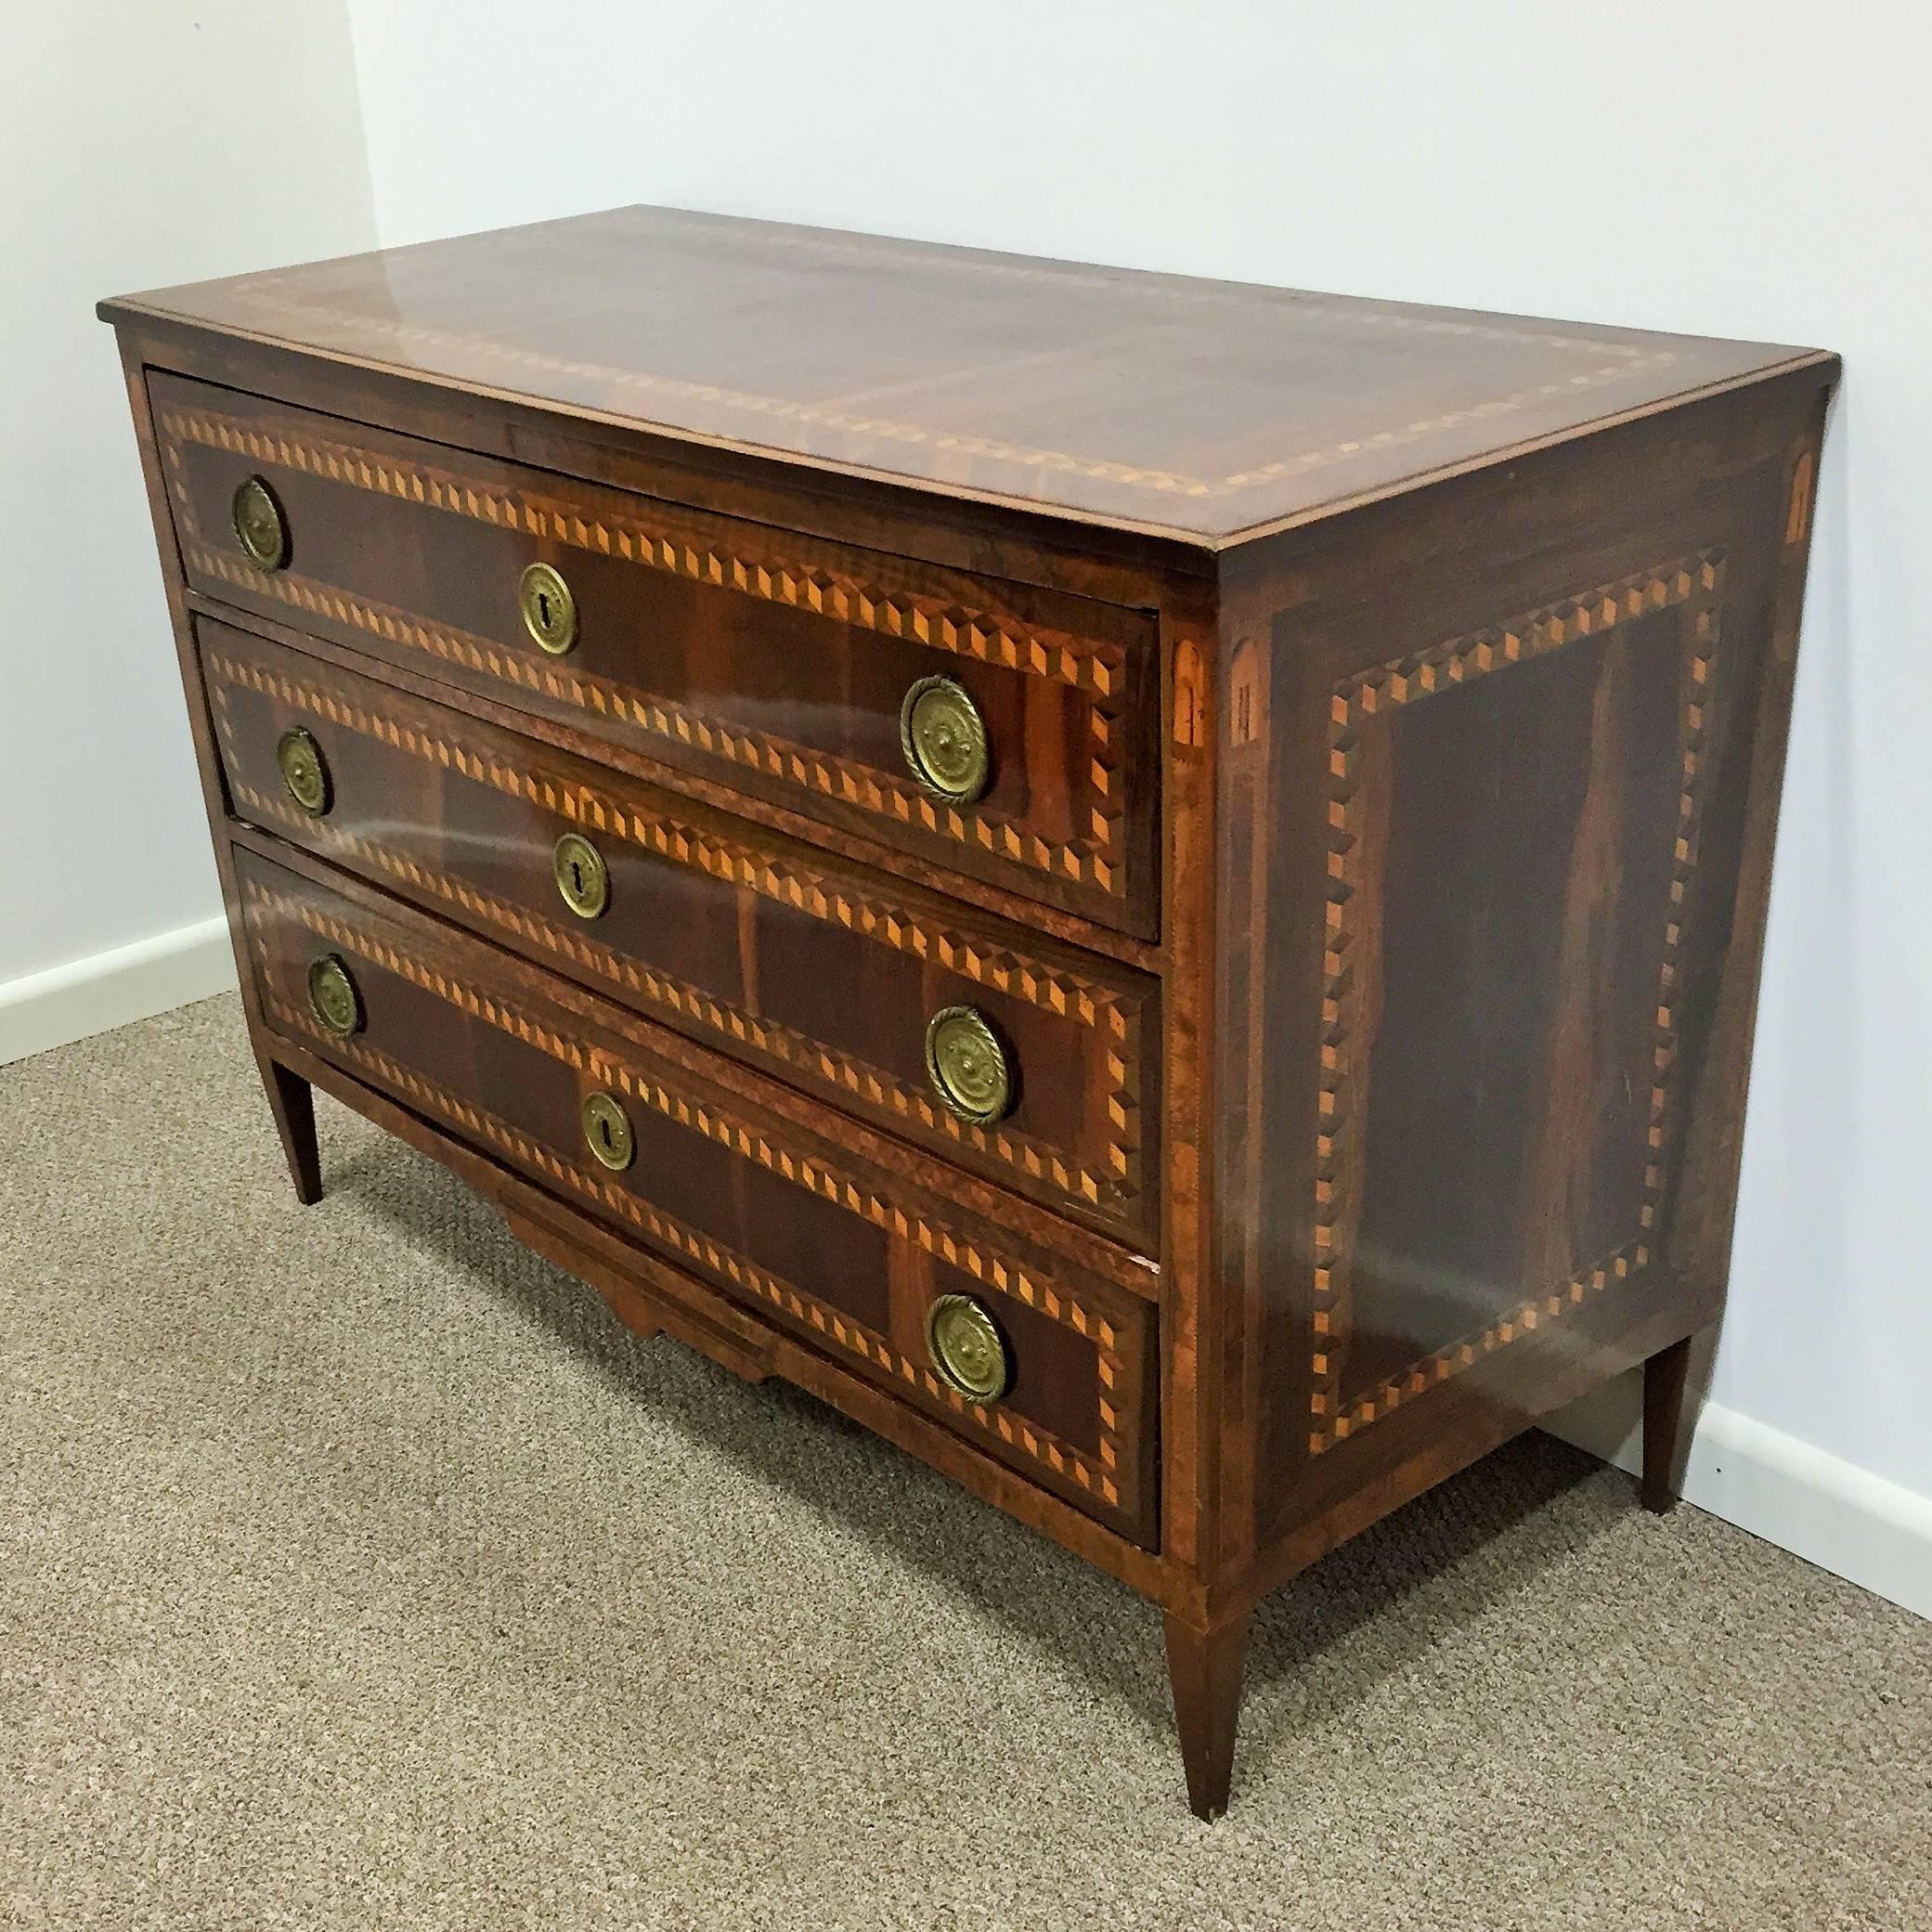 18th century Louis XVI marquetry commode or chest of drawers with tulipwood inlay veneer and oak and pine as secondary wood.